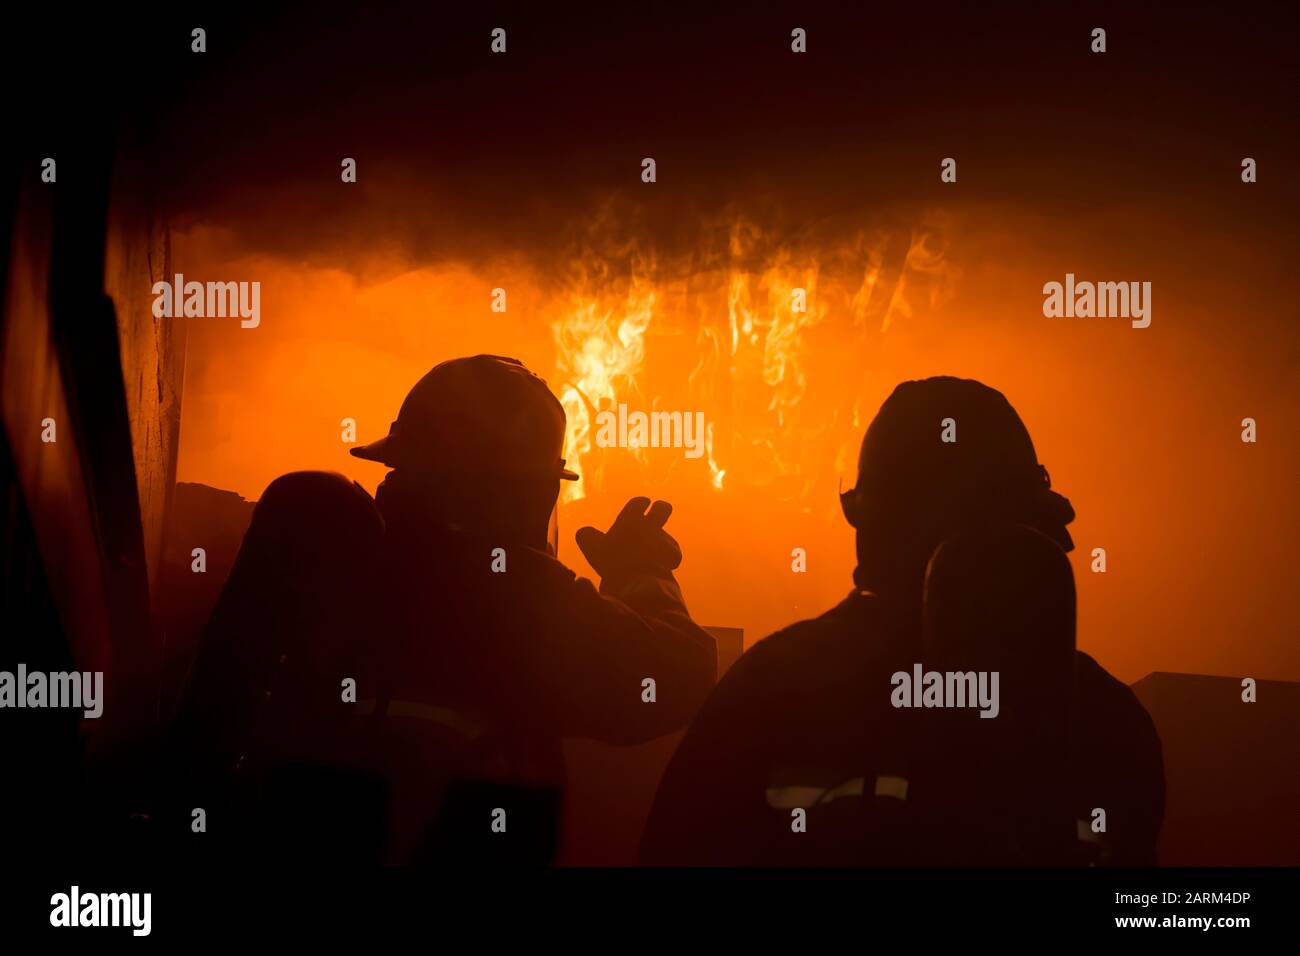 SSgt. Jack Simonds, a firefighter with the Gowen Field Fire Department, instructs a fellow Gowen Field firefighter on how to recognize the signs of flashover during a training in a specialized mobile burn trailer, Gowen Field, Boise, Idaho, Sept. 13, 2019. The training provided an opportunity to see what flashover looks like and figure out how to deal with it, how to prevent it, and how to react and escape if encountered. (U.S. Air National Guard photo by Ryan White) Stock Photo